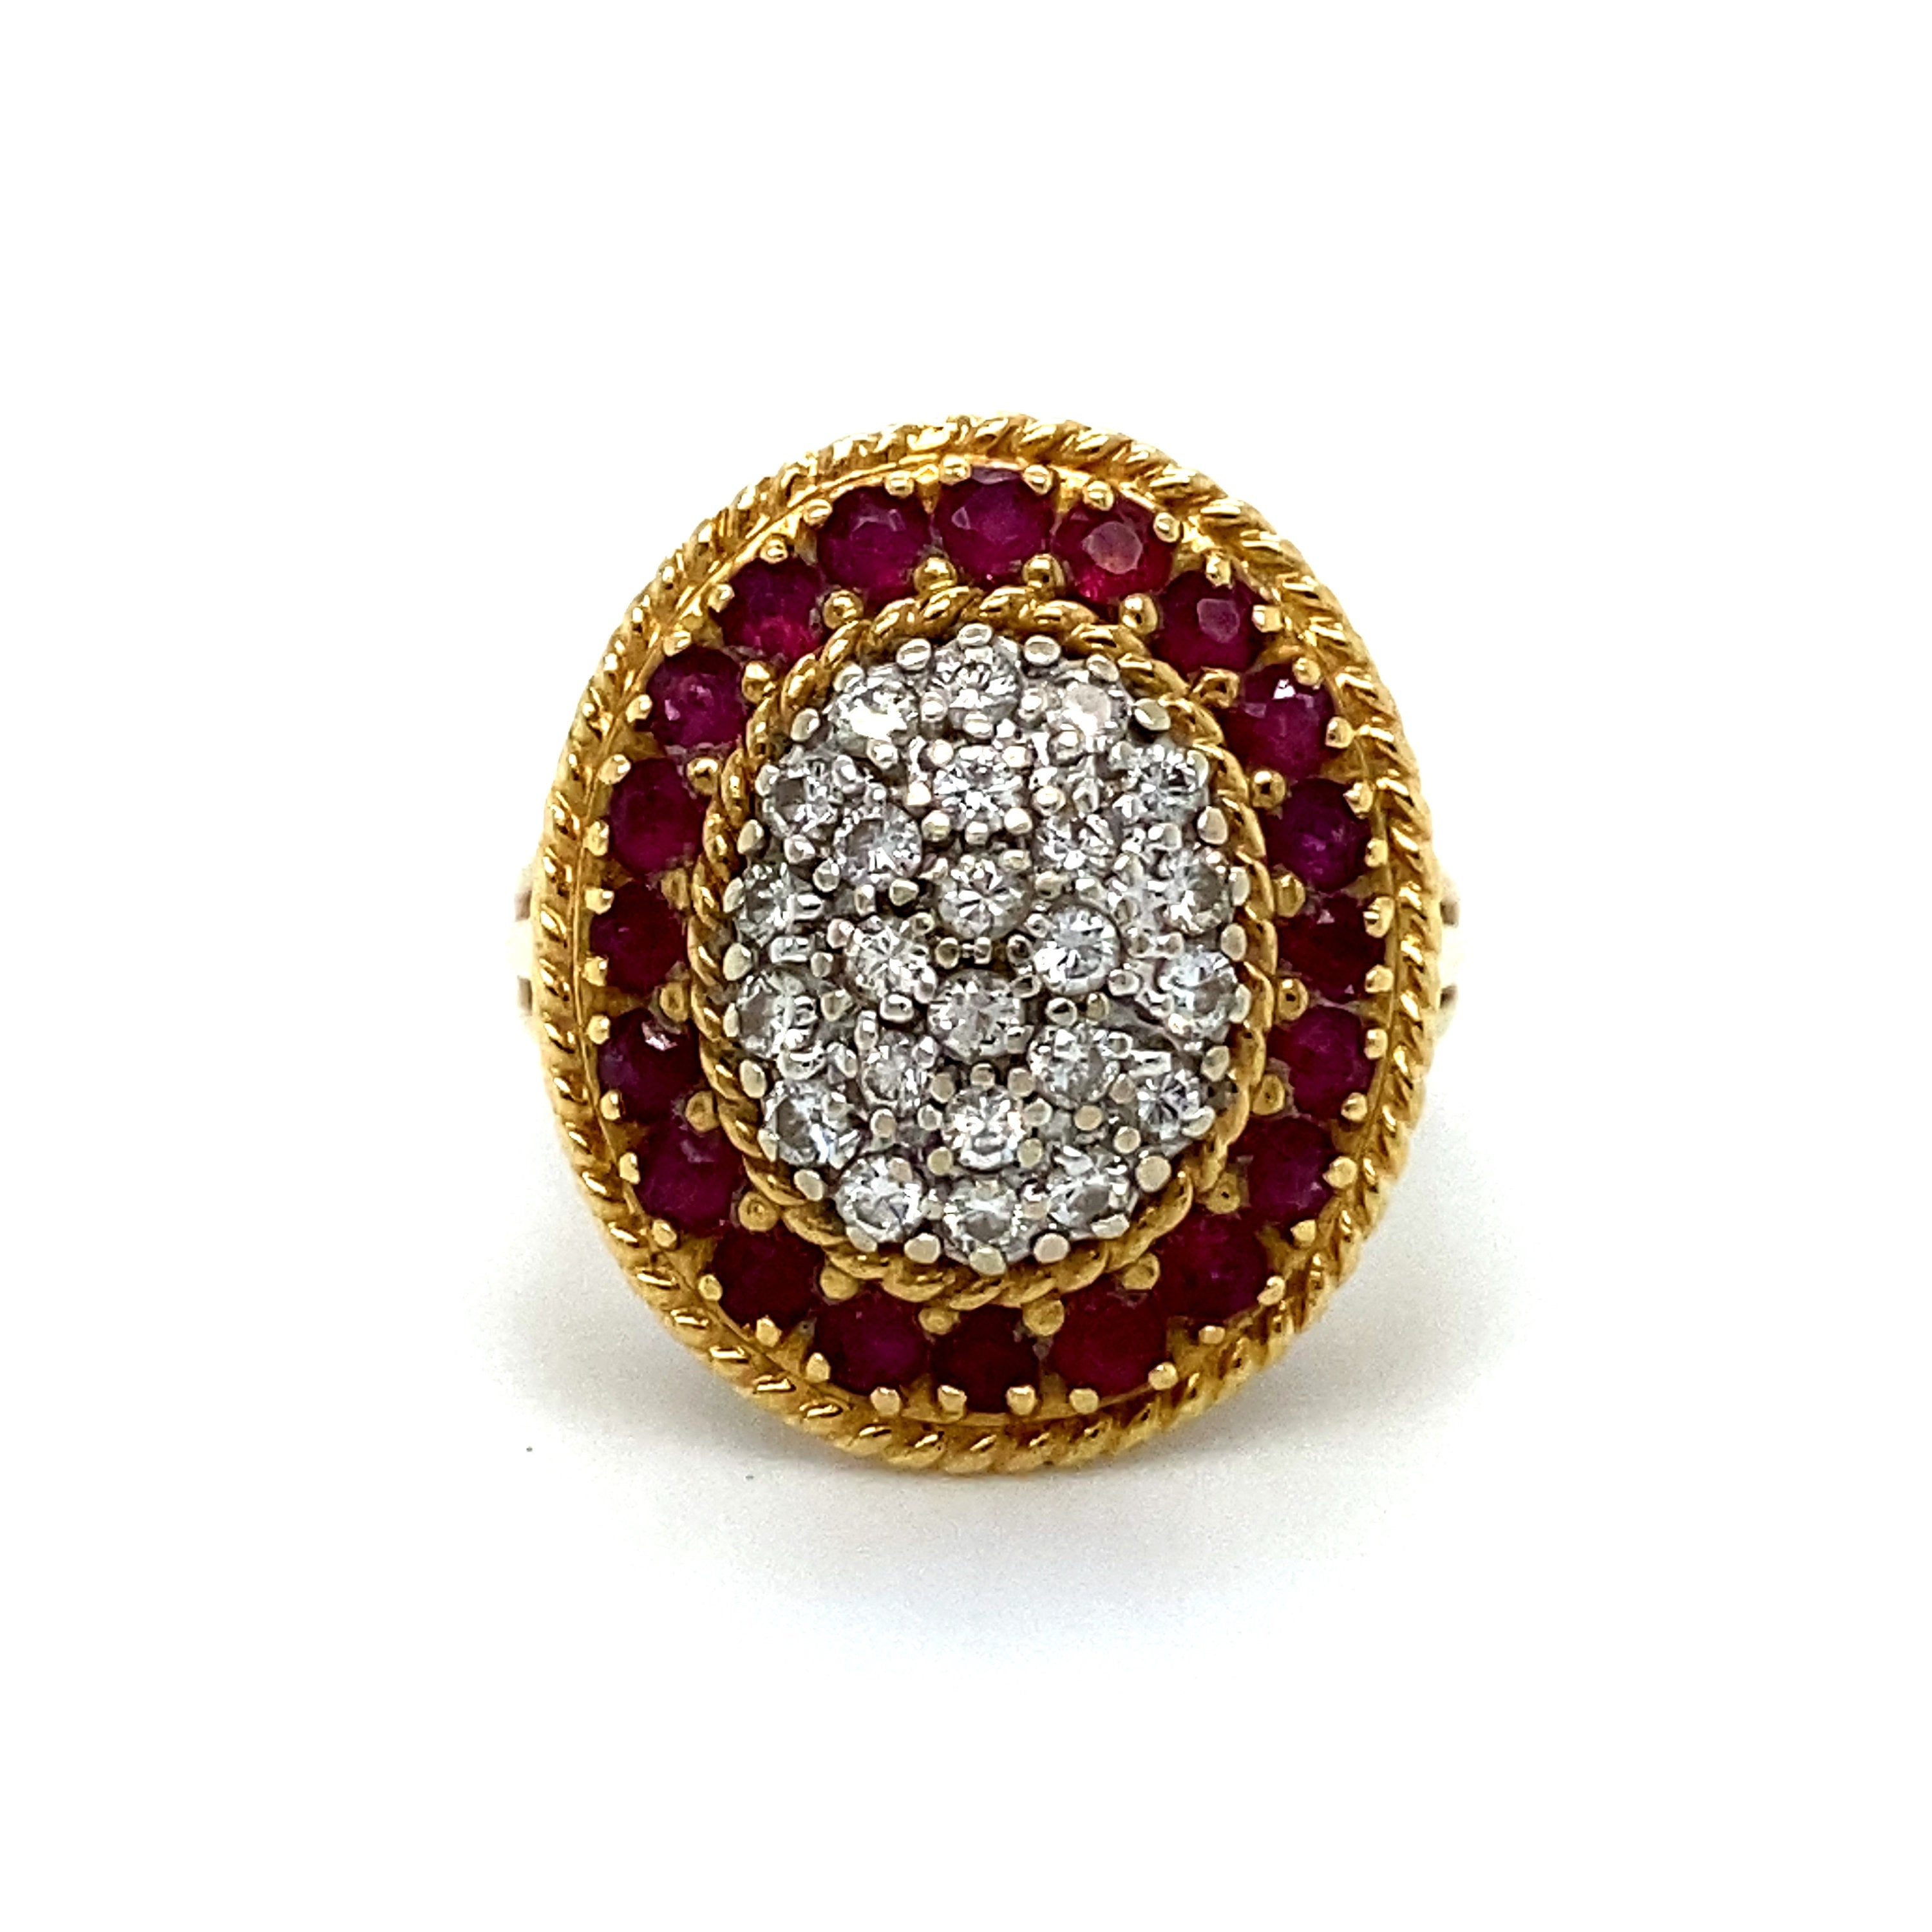 Vintage Diamond and Ruby Halo Ring Engagement Ring in 18K Yellow Gold - 1.72ct.